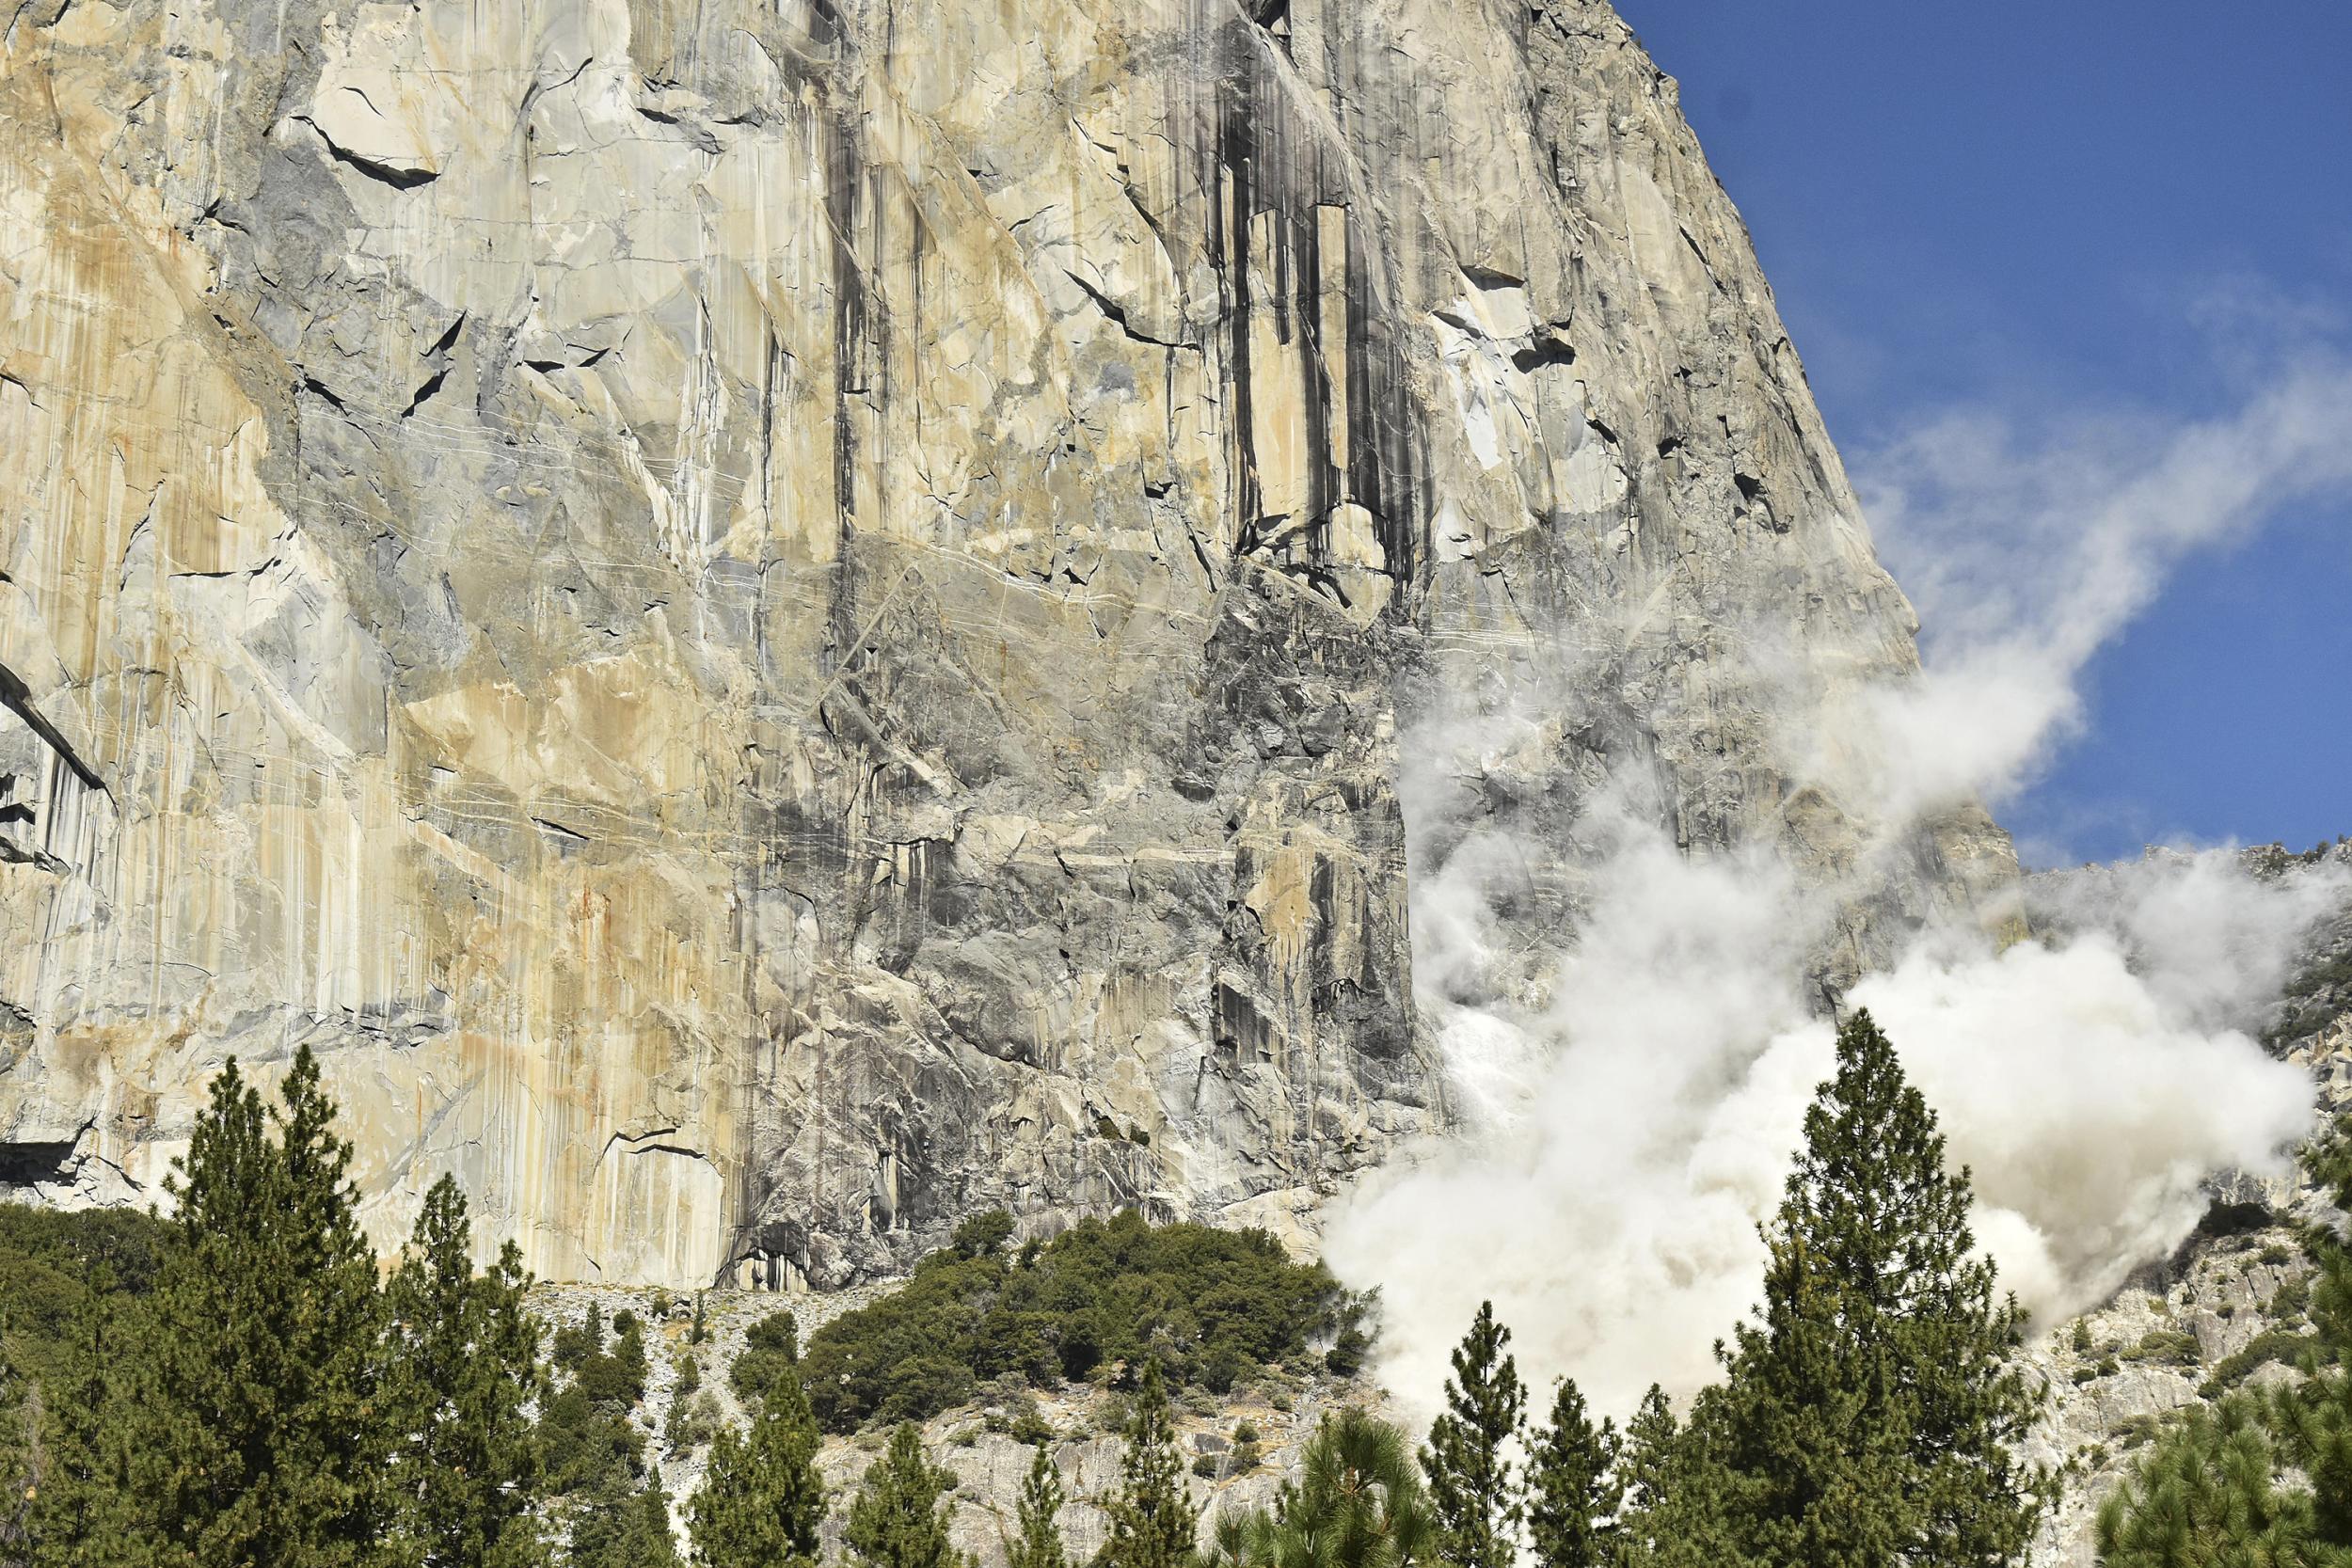 A cloud of dust is seen on El Capitanafter the rock fall that killed Andrew Foster